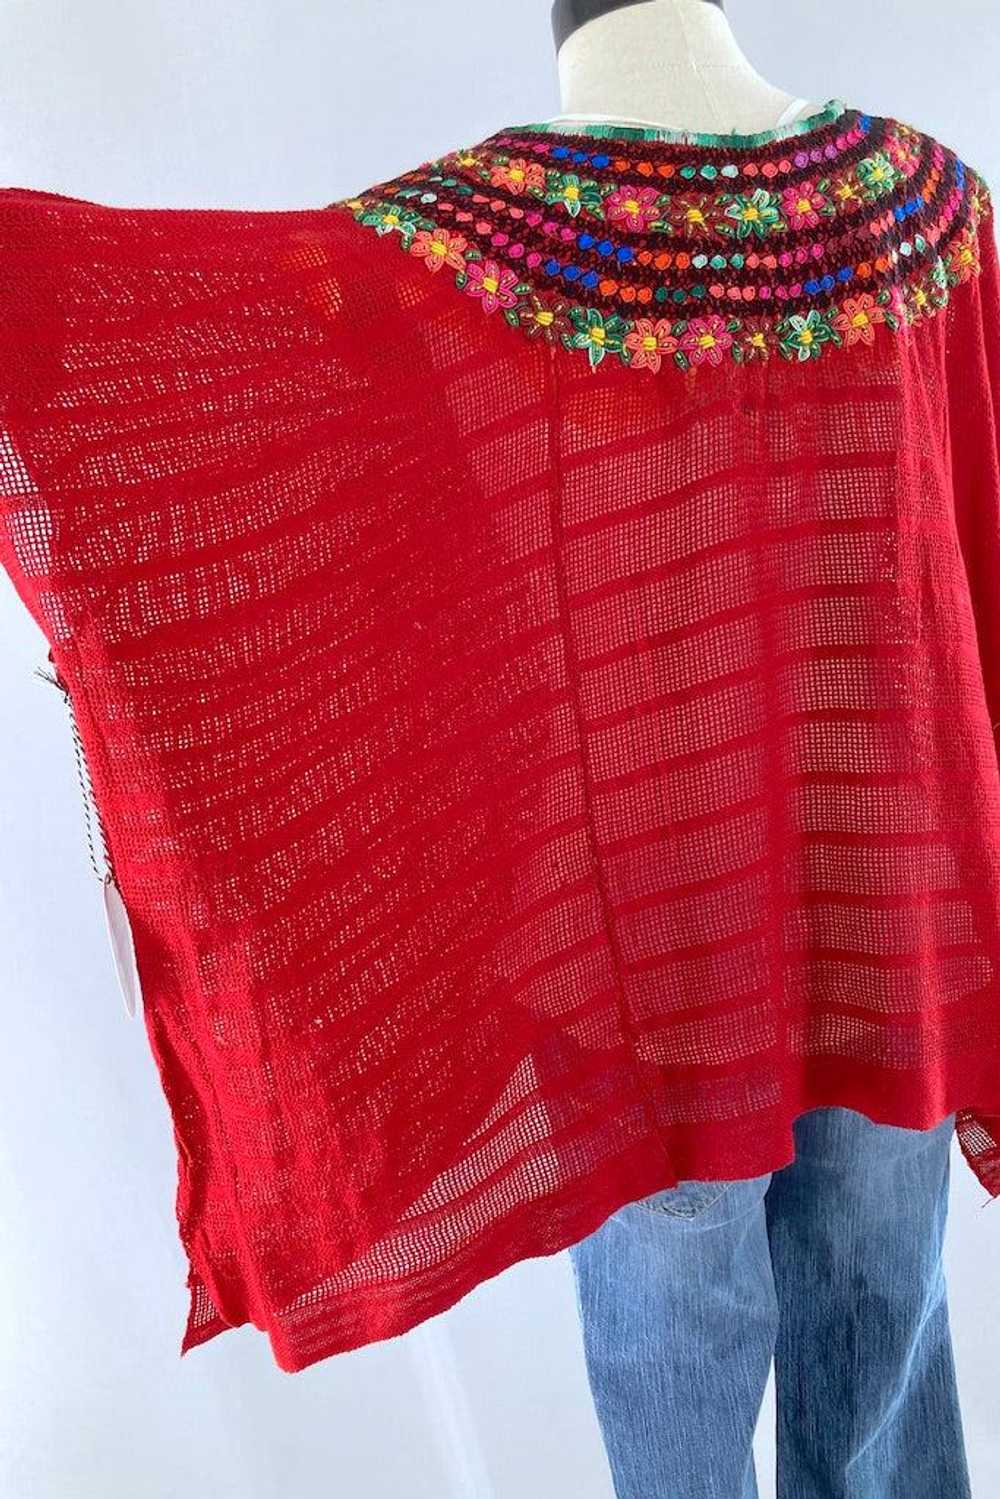 Vintage Embroidered Cotton Tunic - image 7